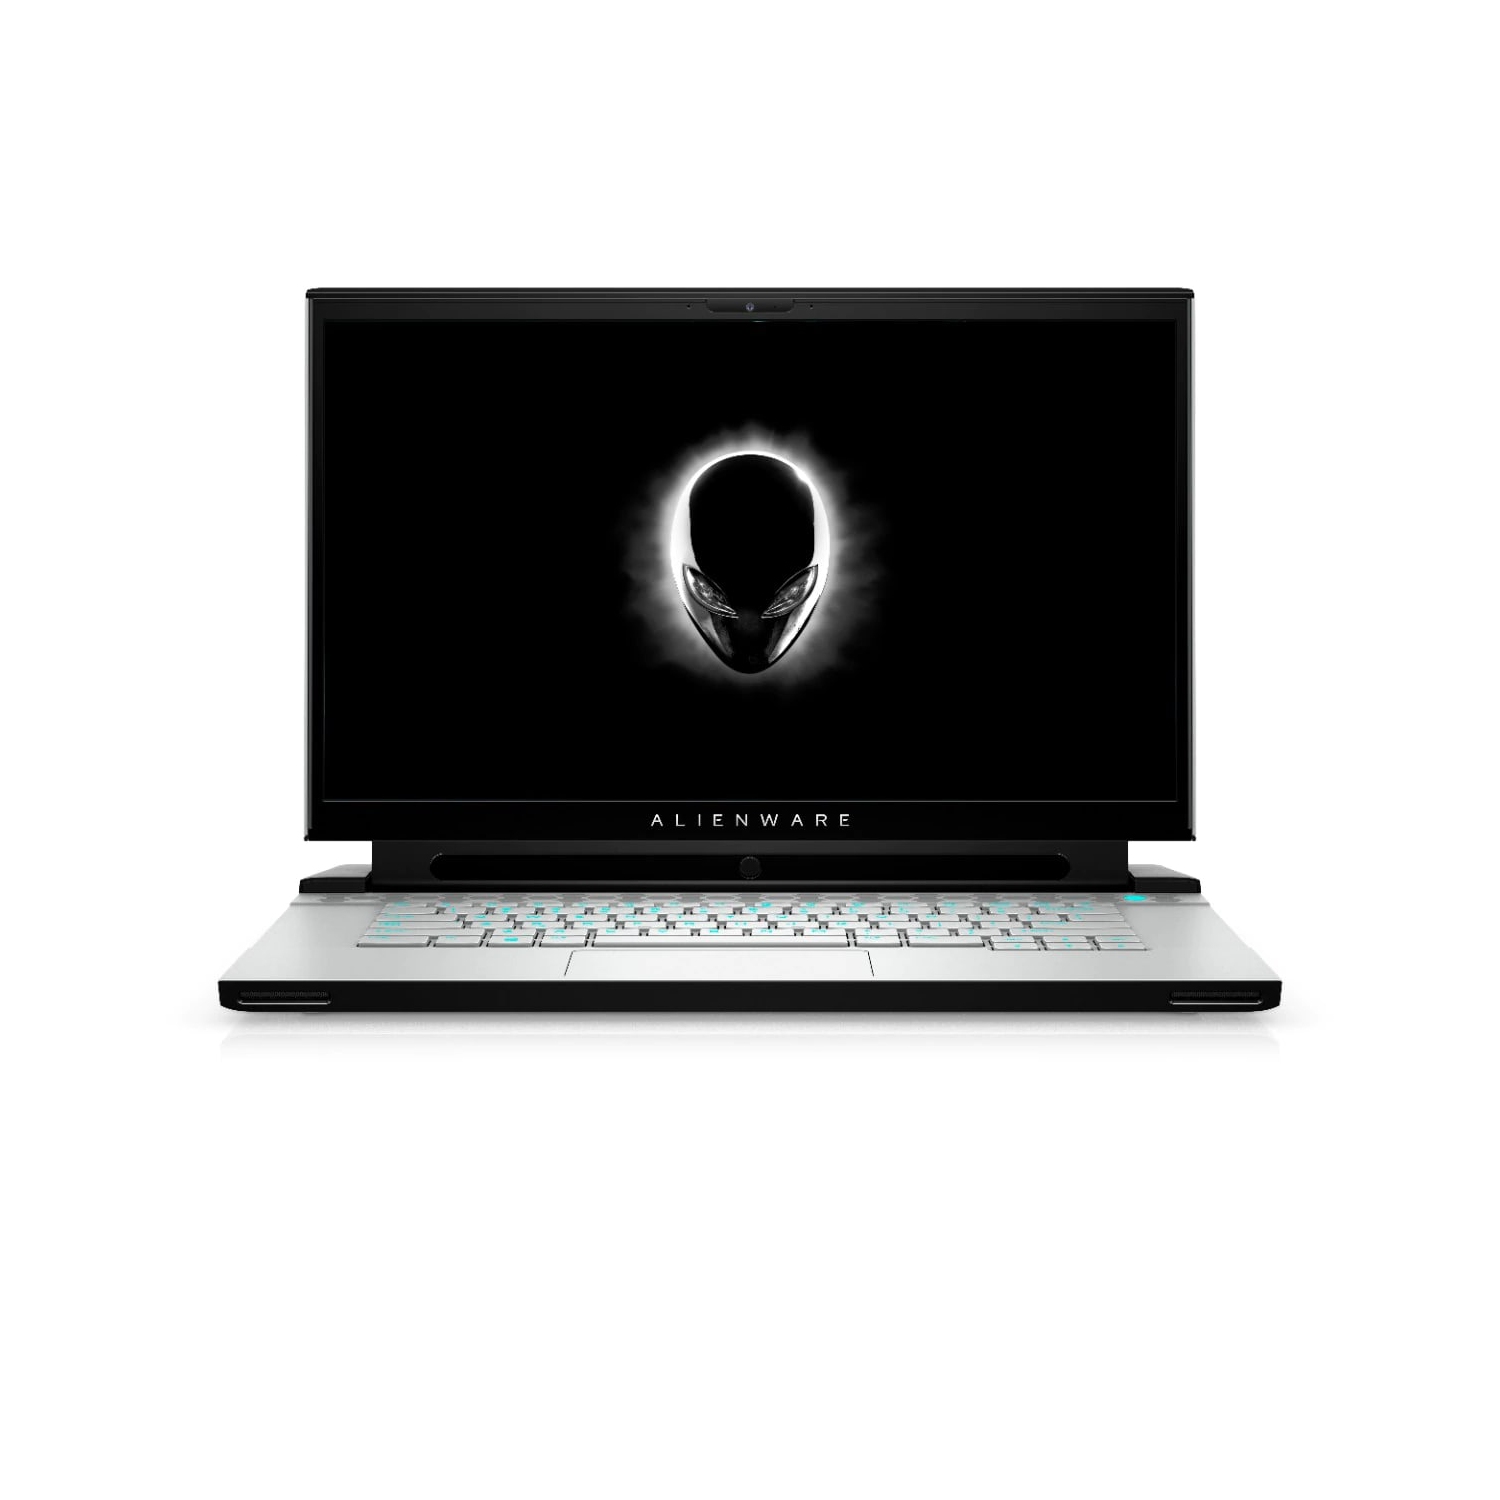 Refurbished (Excellent) - Dell Alienware m15 R3 Gaming Laptop (2020), 15.6" FHD, Core i7, 1TB SSD, 32GB RAM, 2070 Super, 8 Cores @ 5.1 GHz, 10th Gen CPU Certified